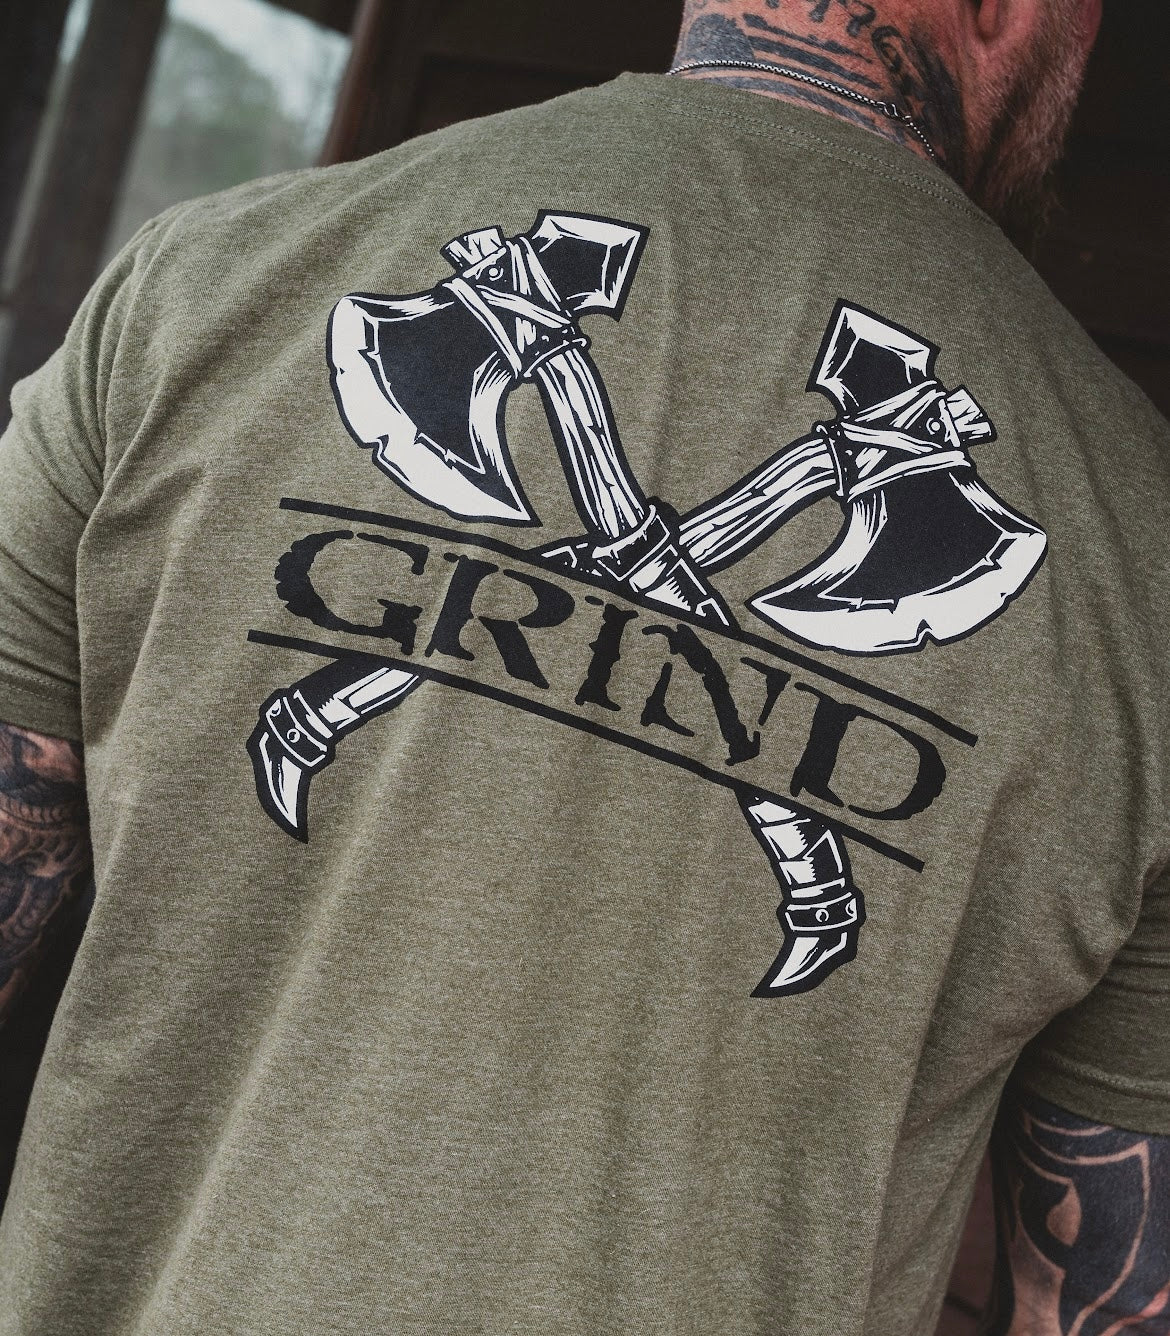 The Grind Athletics Graphic T-Shirt S / Military Green Axes Tee